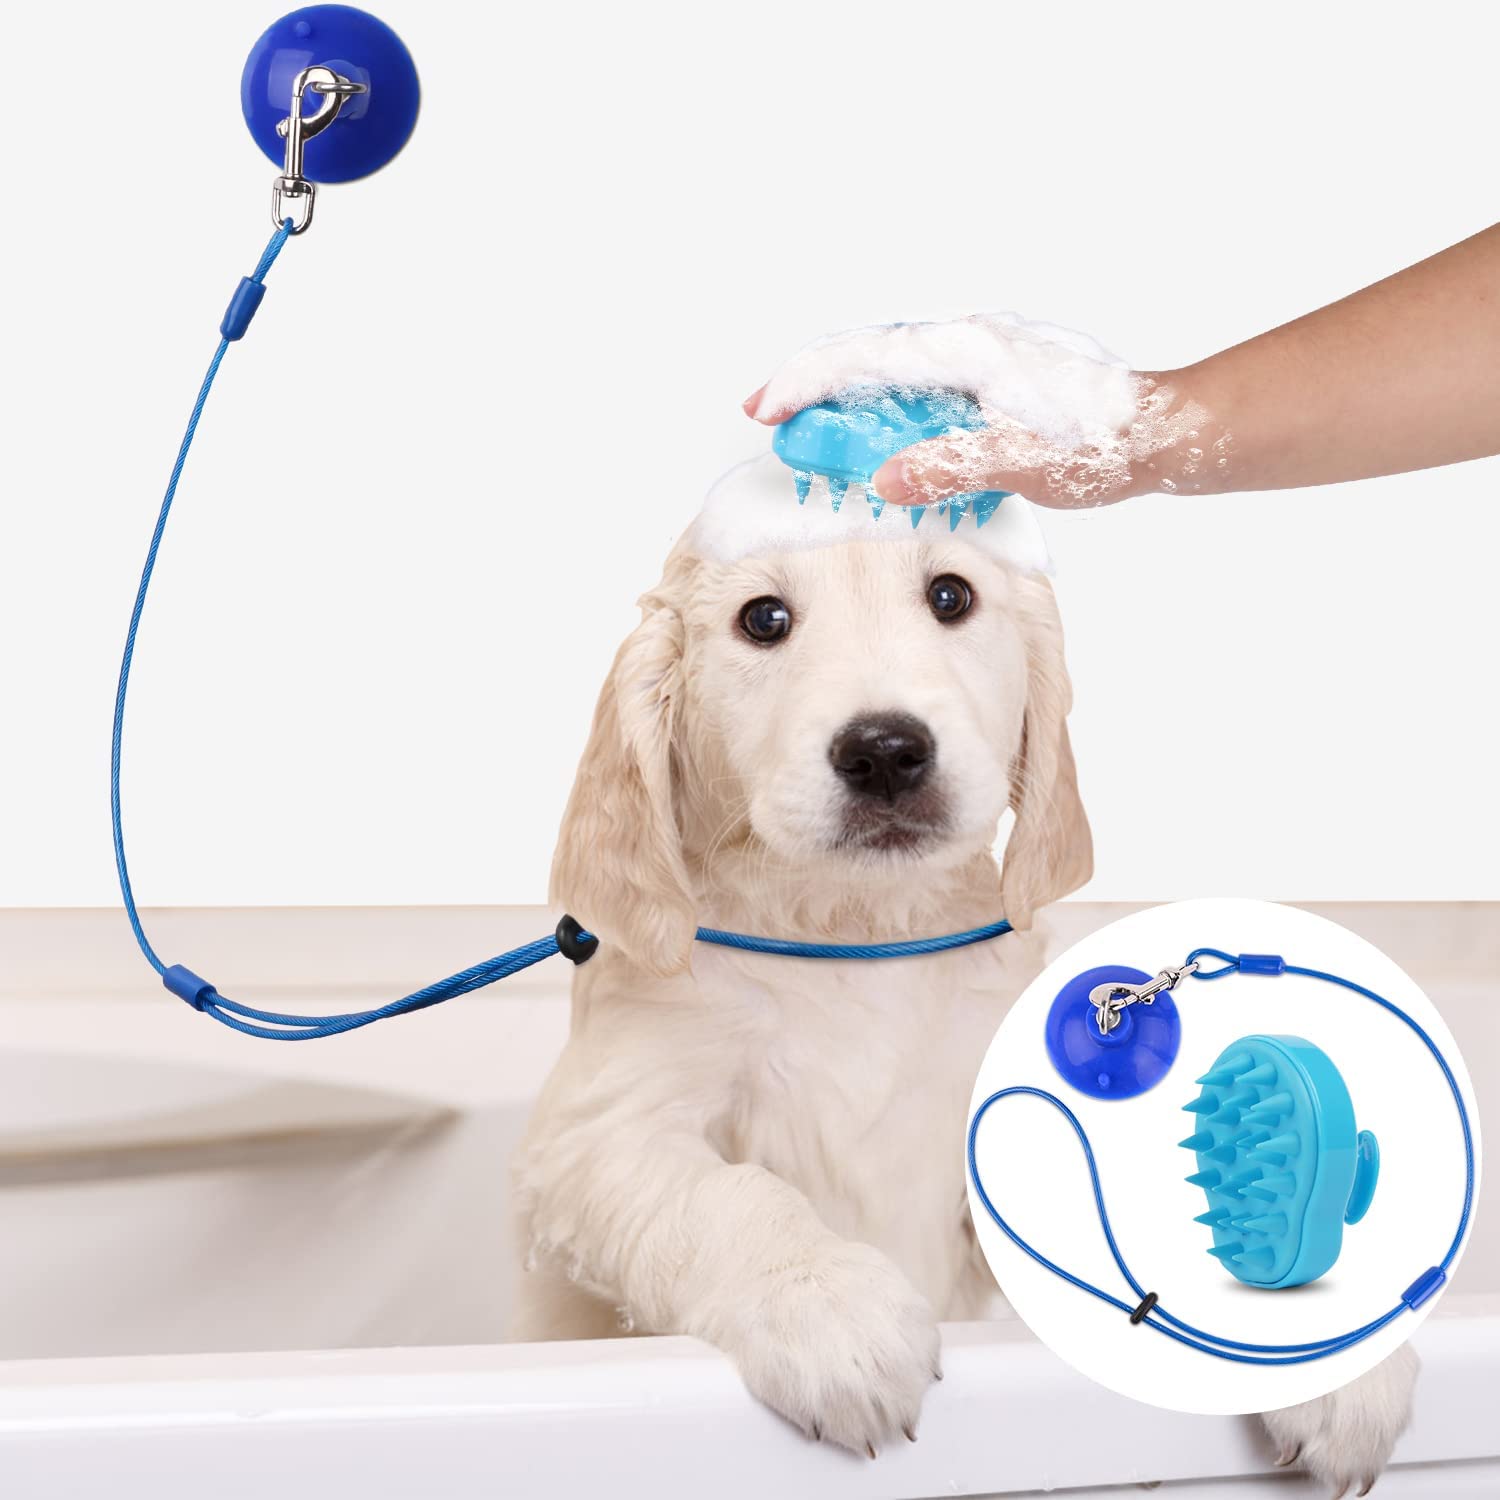 Petbobi Dog Bath Tether with Heavy Suction Cup + Adjustable Dog Grooming Leash + Soft Bath Brush, Dog Bathing Leash for Restraint Pets During Shower and Grooming